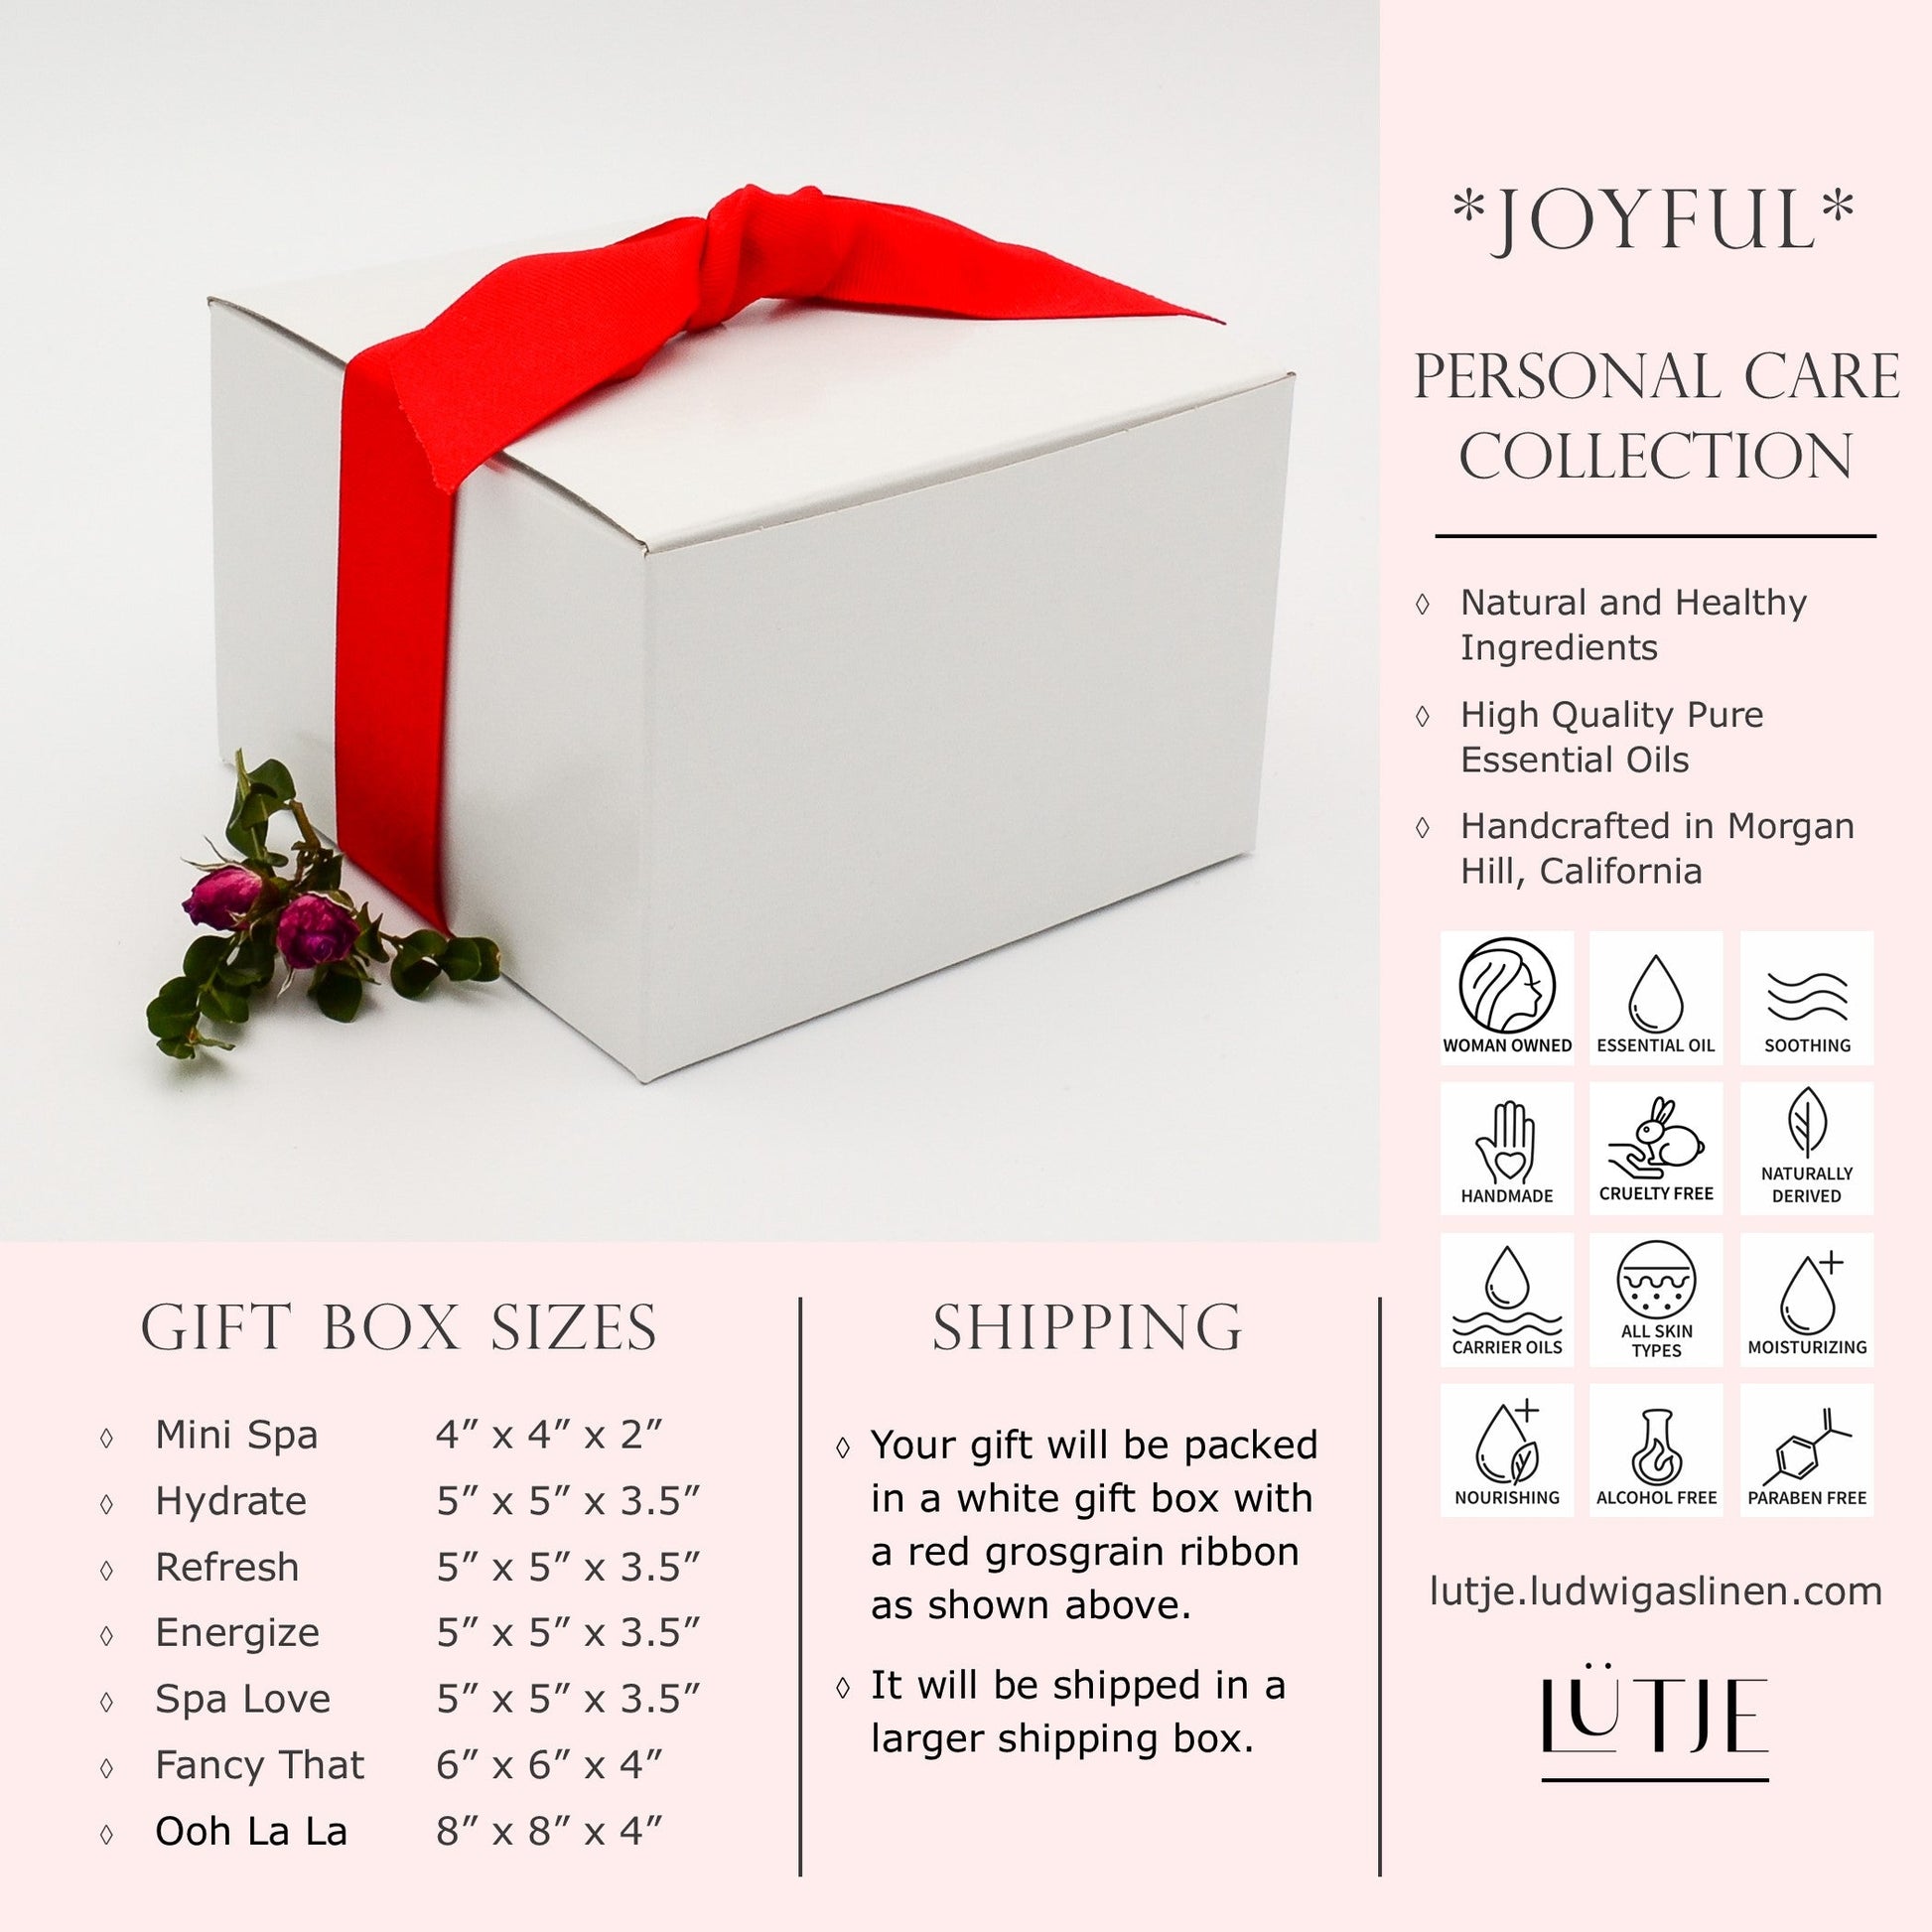 Gift Box for women Geranium & Sage Be Loved Collection shipping and general information including made with natural and healthy ingredients,woman owned, handmade, cruelty free, naturally derived, pure essential oils, all skin types, moisturizing, soothing, nourishing, alcohol free and paraben free. 